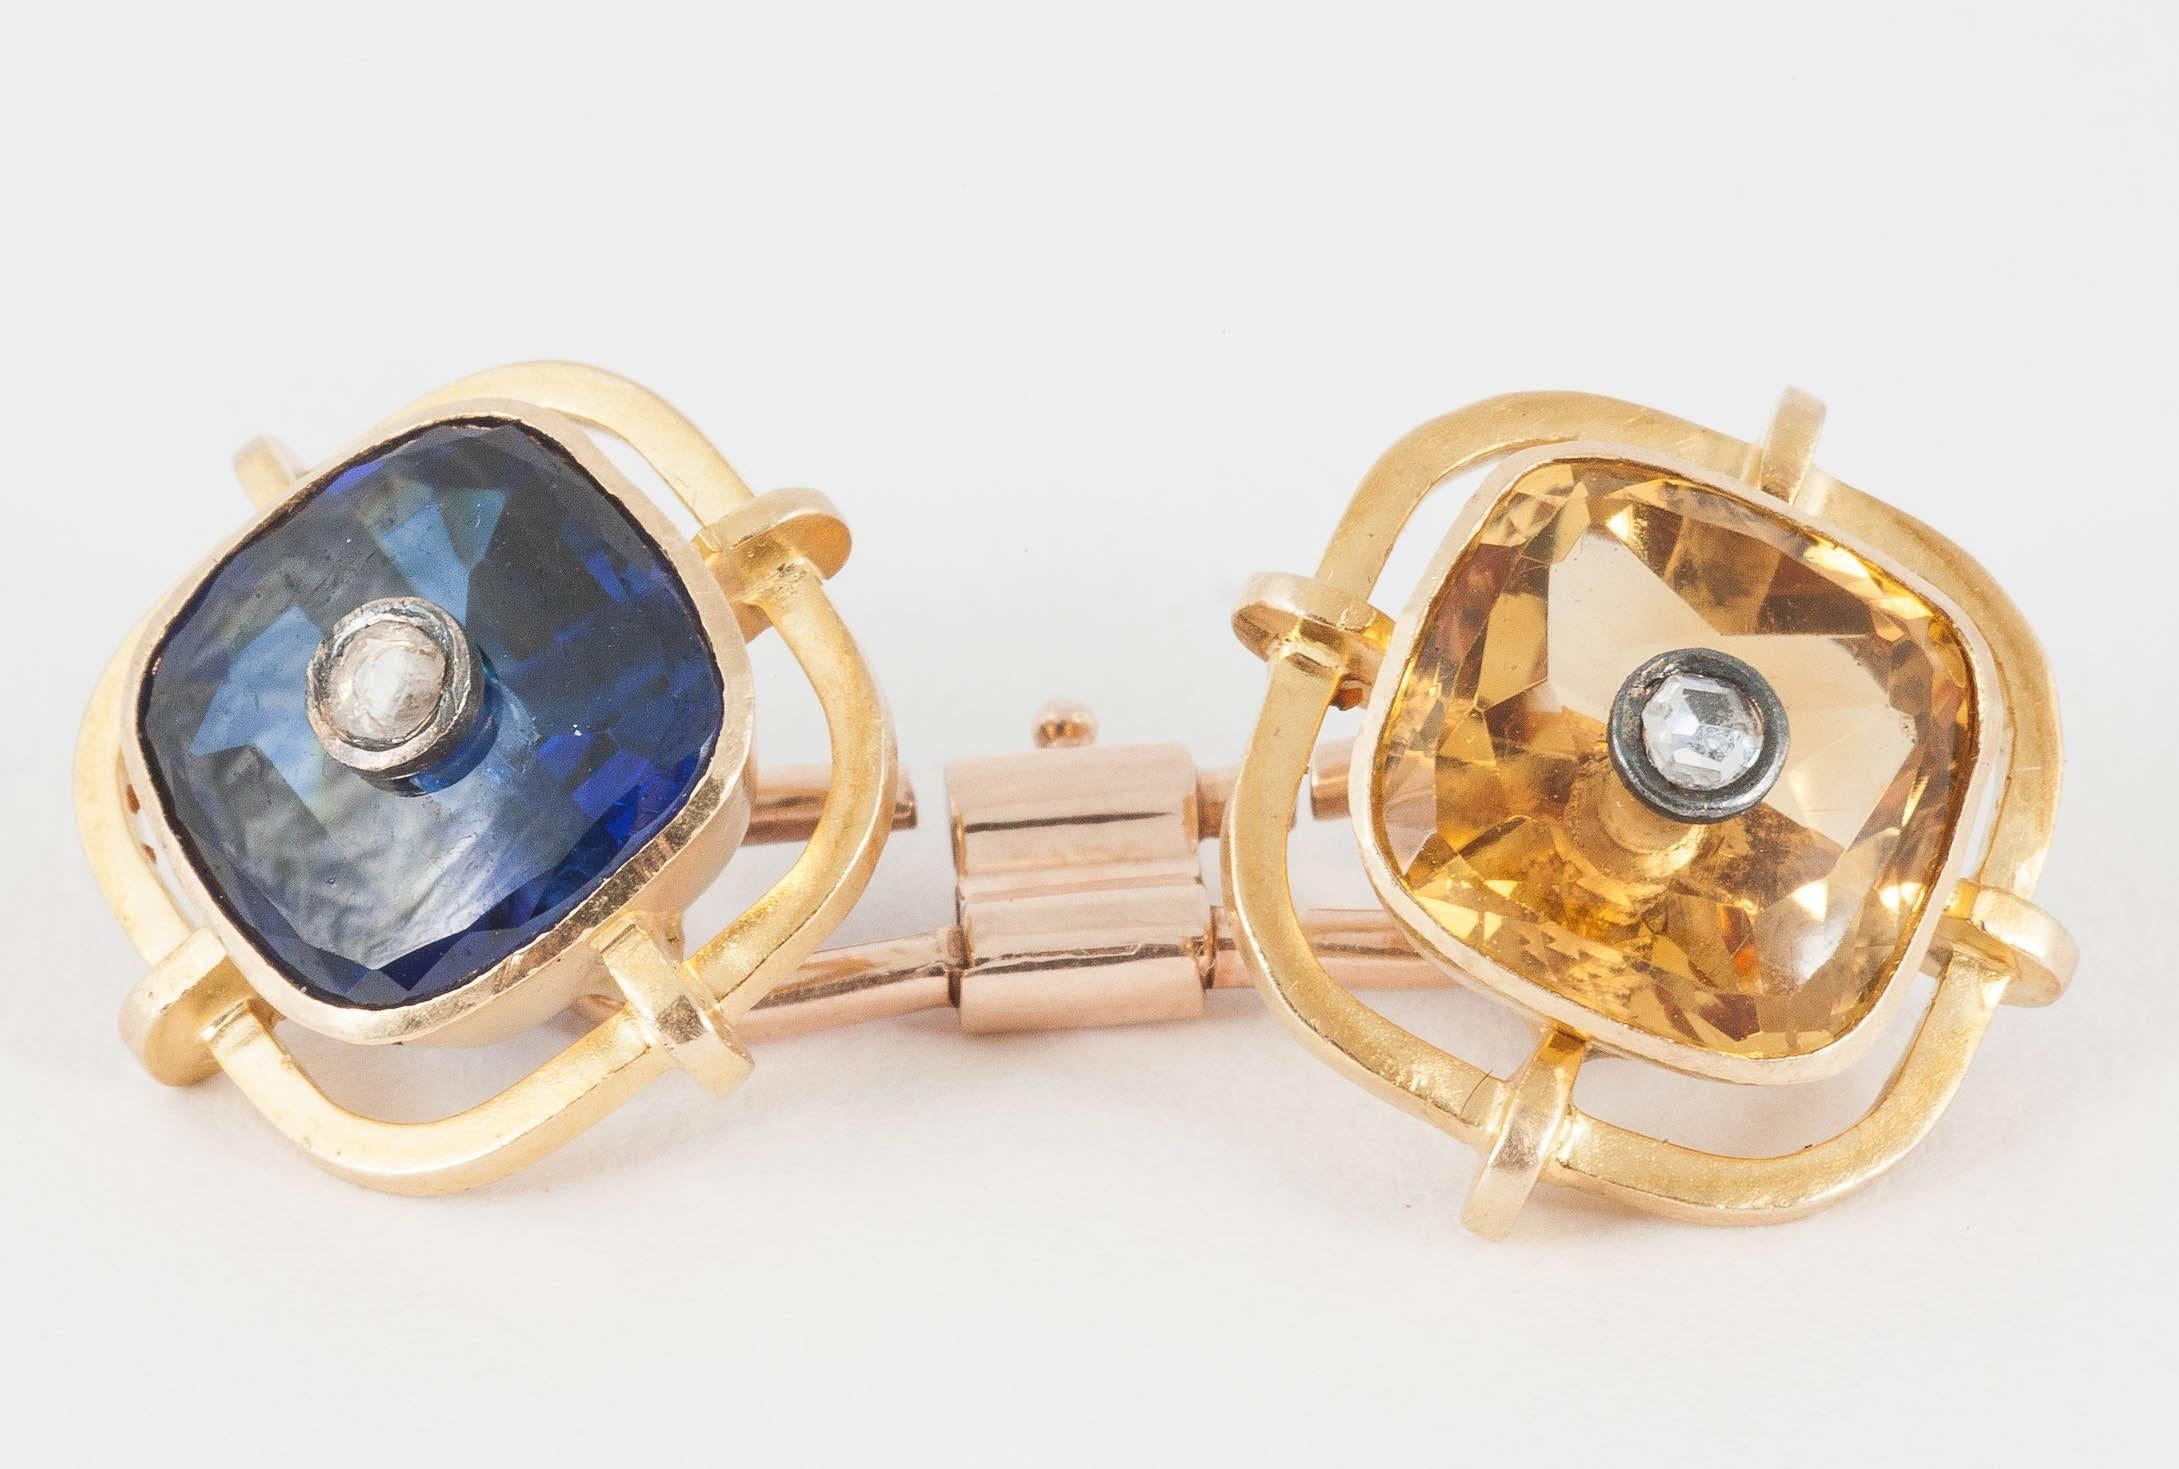 Cufflinks, mounted in  Gold with Coloured Stones, circa 1920, diamond centre. 1